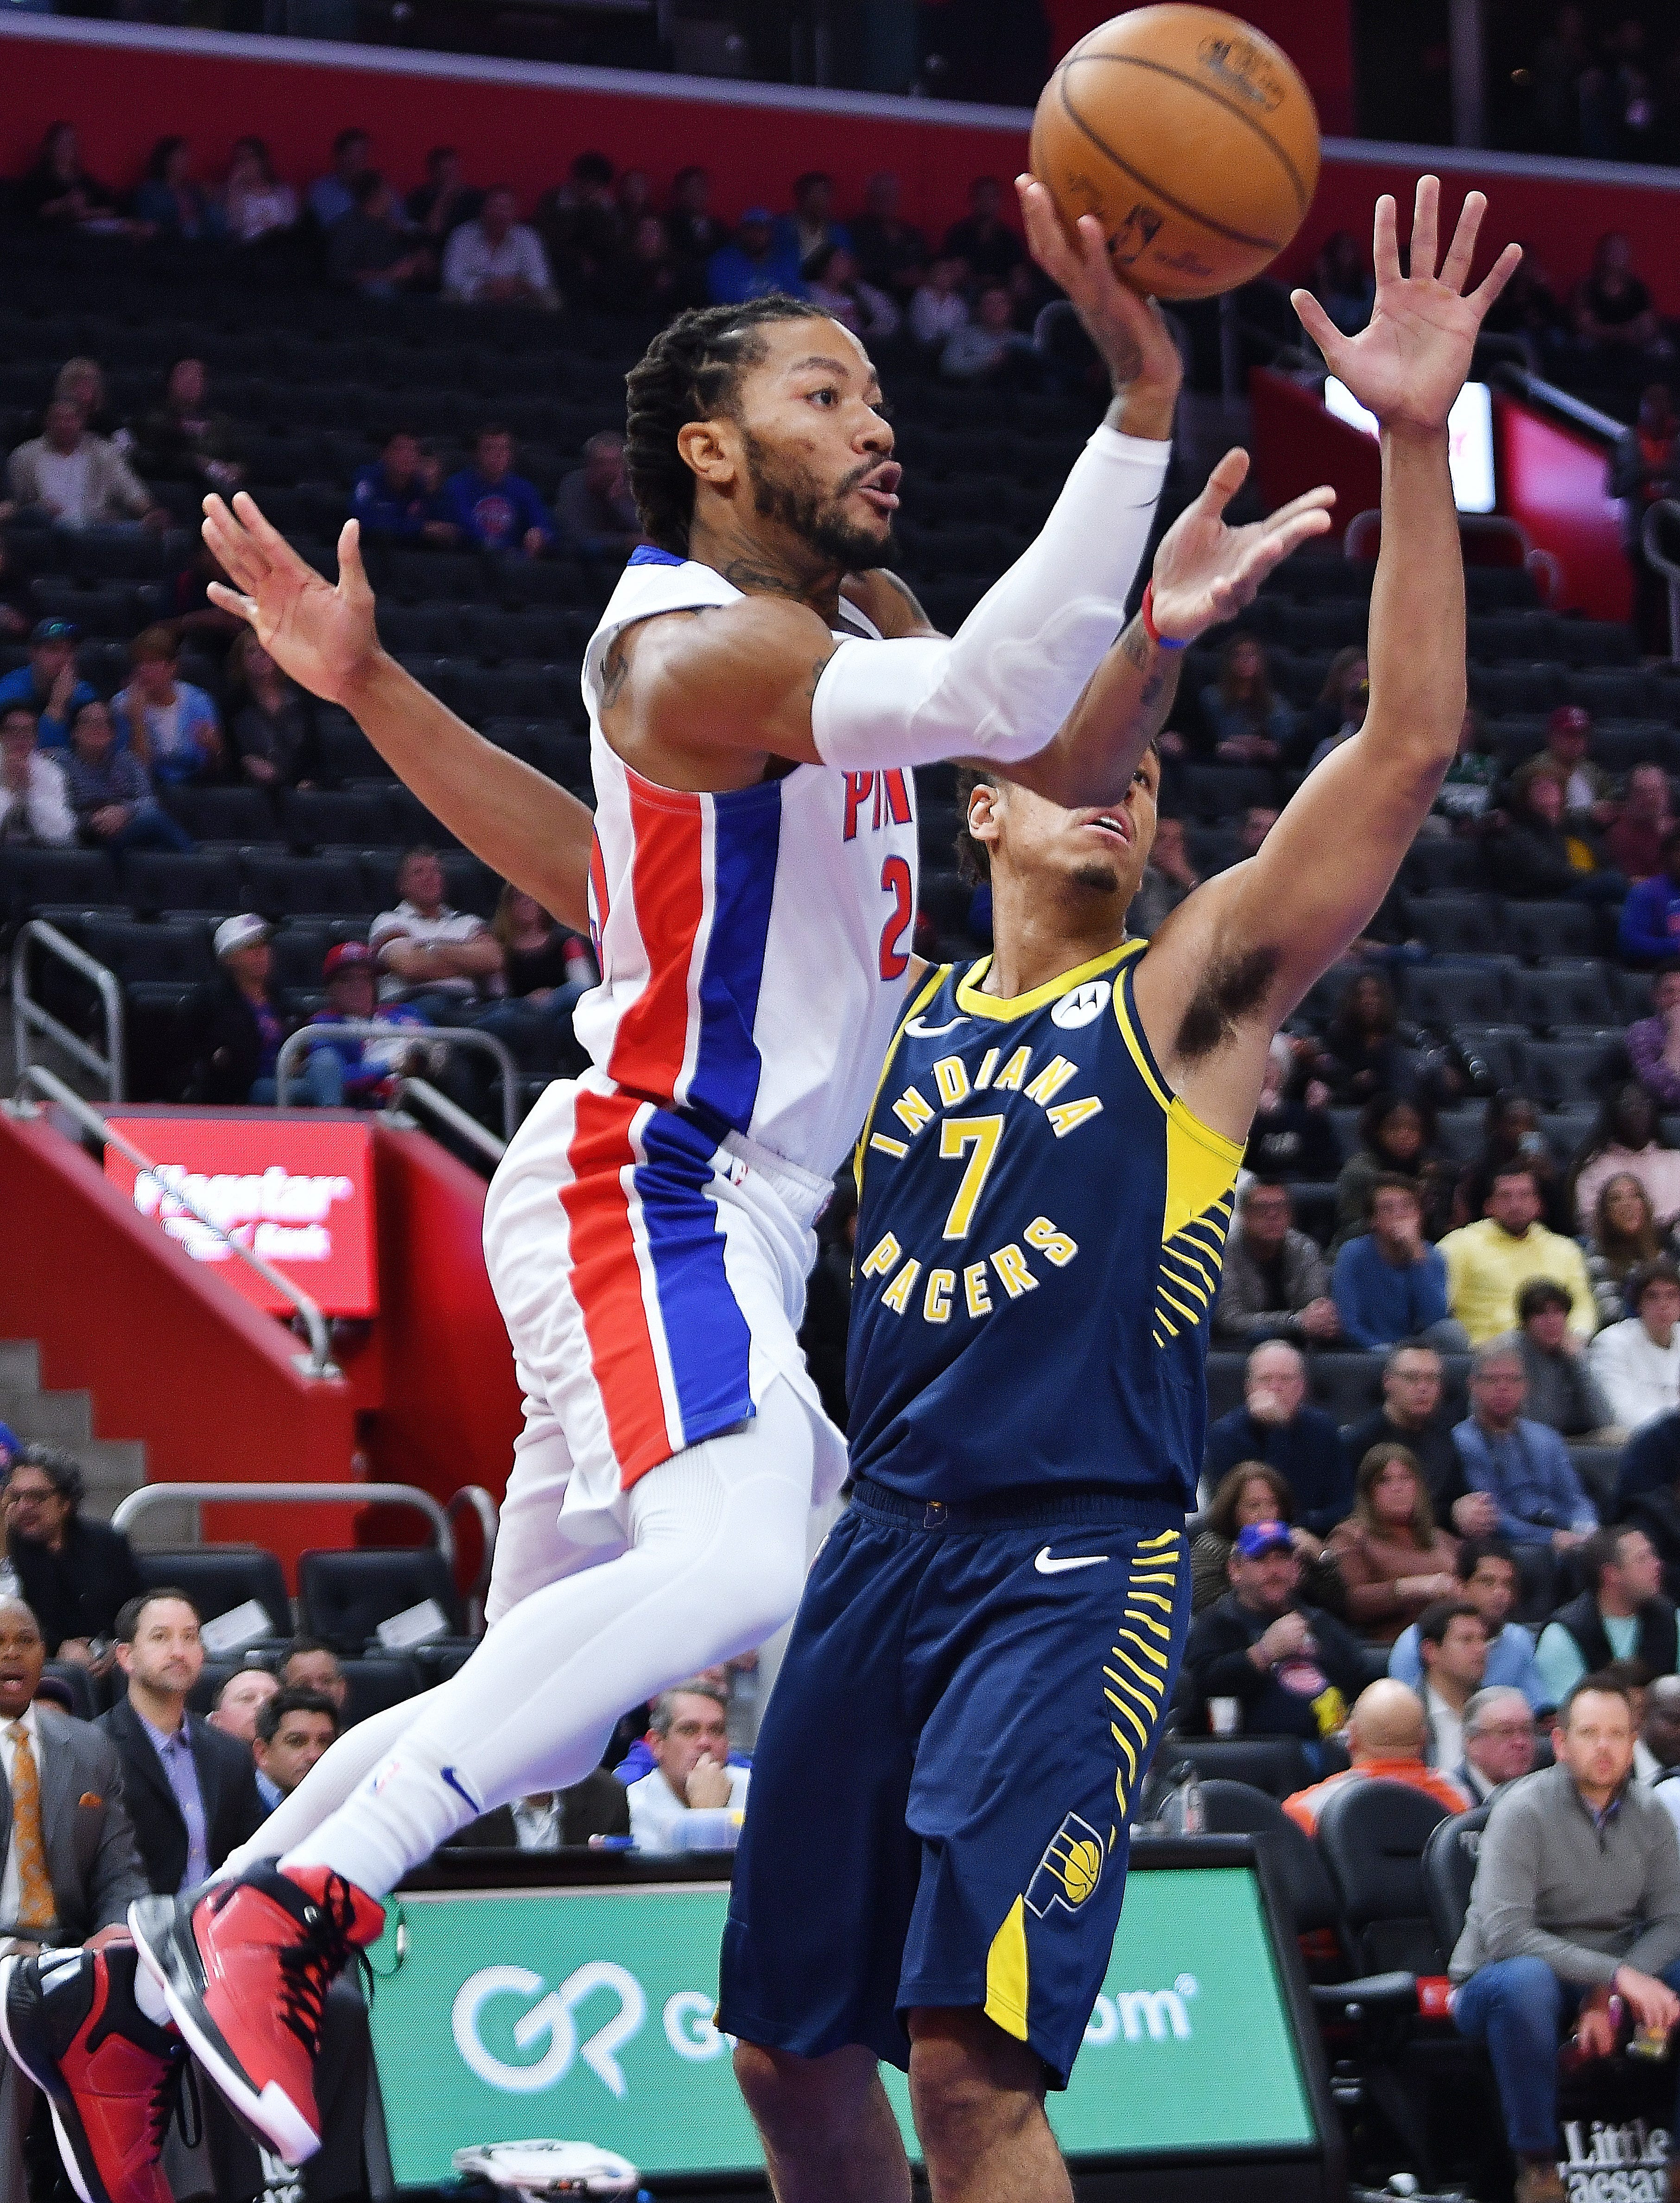 Pistons' Derrick Rose makes a pass over Pacers' Malcolm Brogdon in the second quarter.